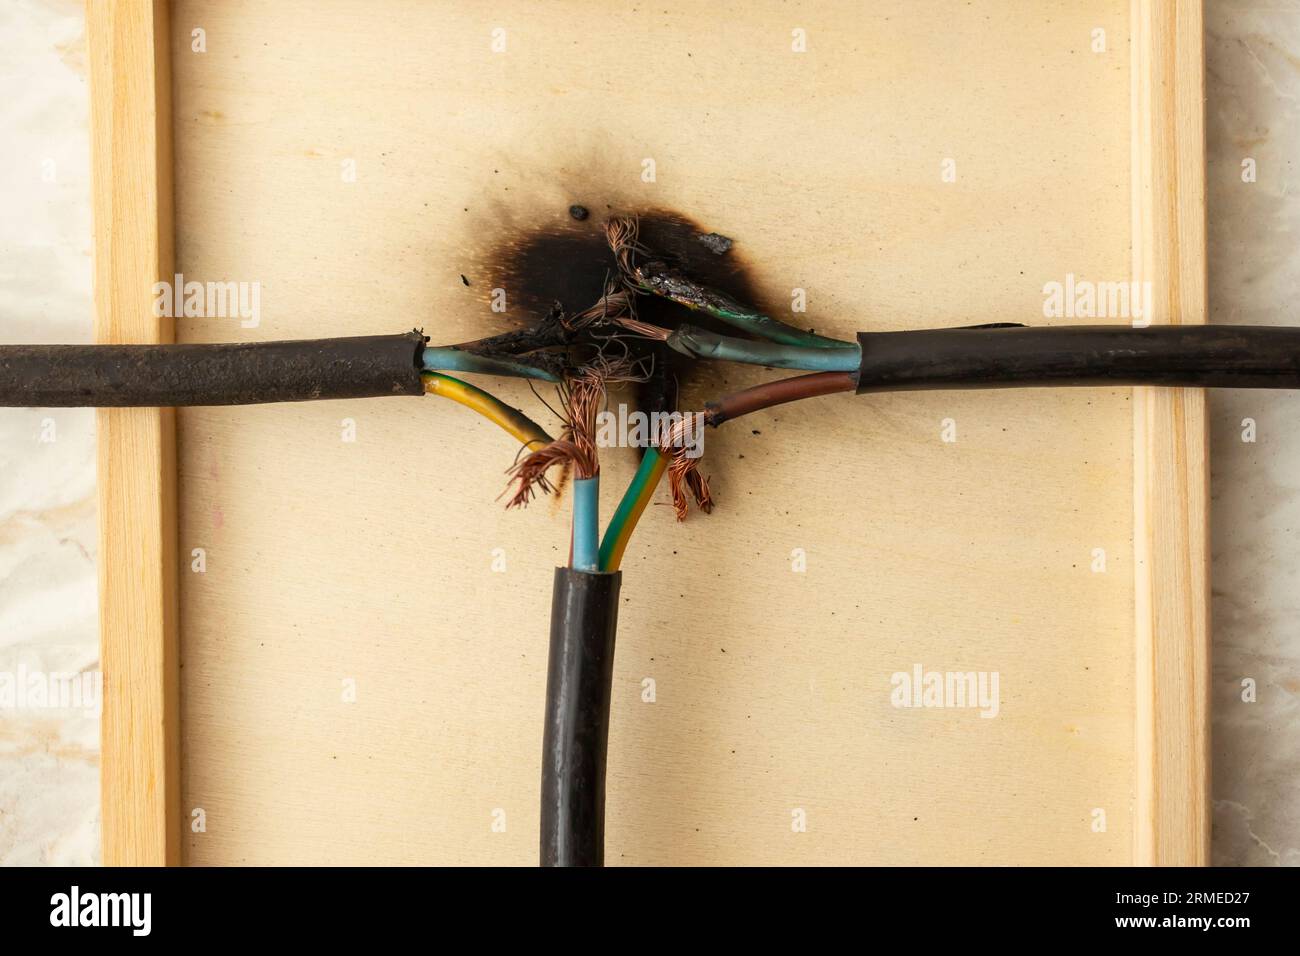 Charred plywood texture under burned faulty wiring, short circuit fire hazard concept, close up Stock Photo